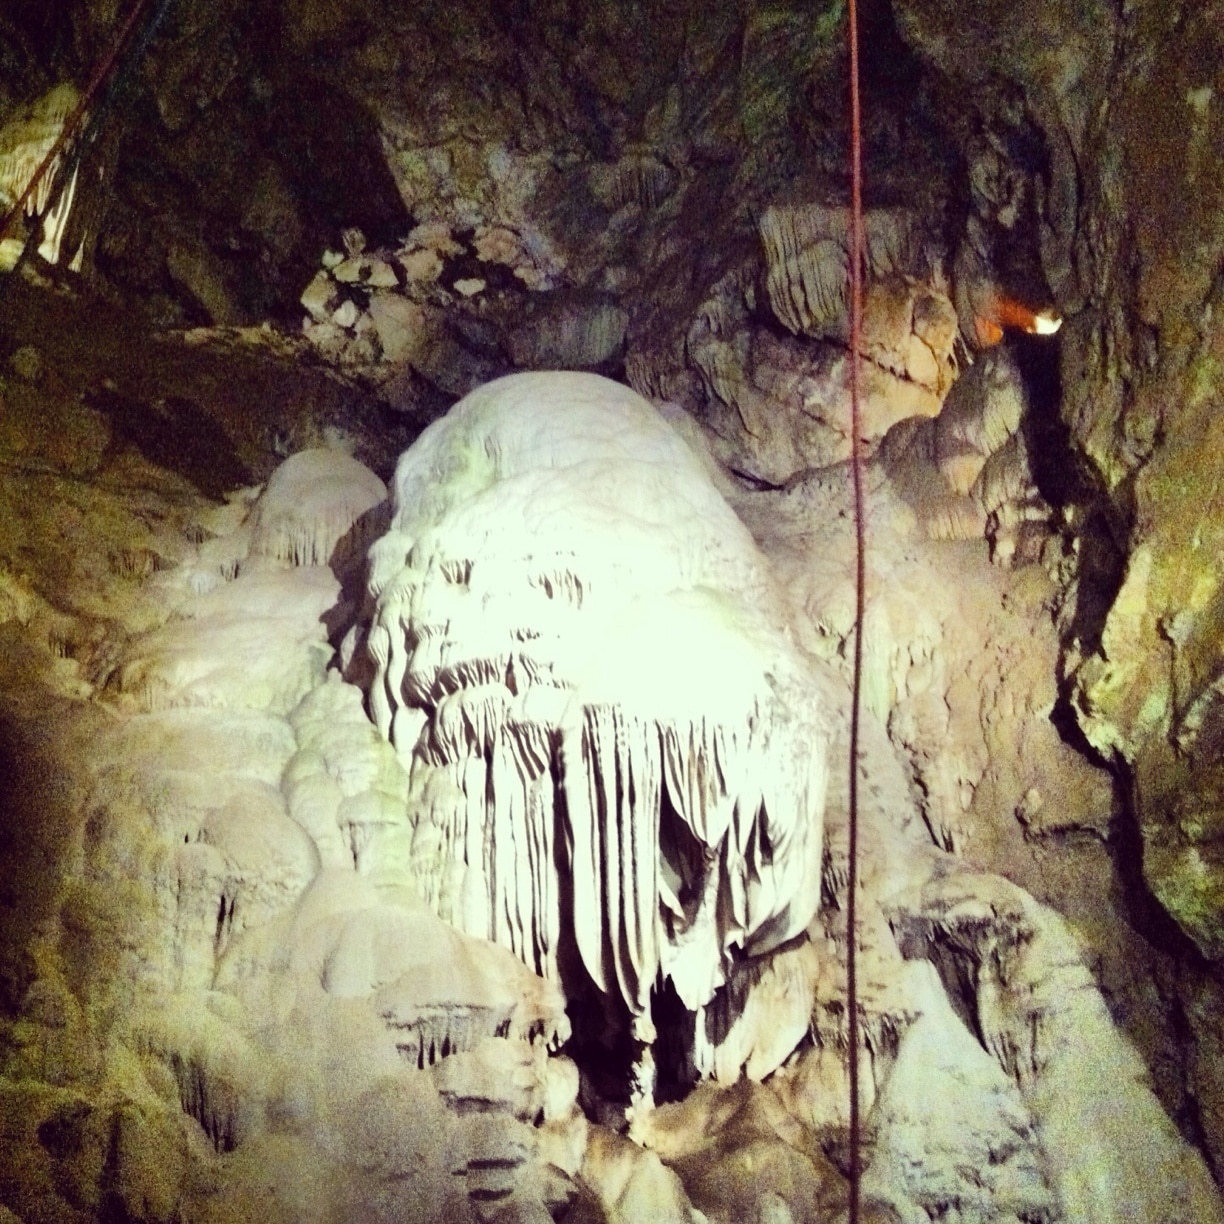 Ginormous stalagmite in Moaning Caverns near Sonora California. 